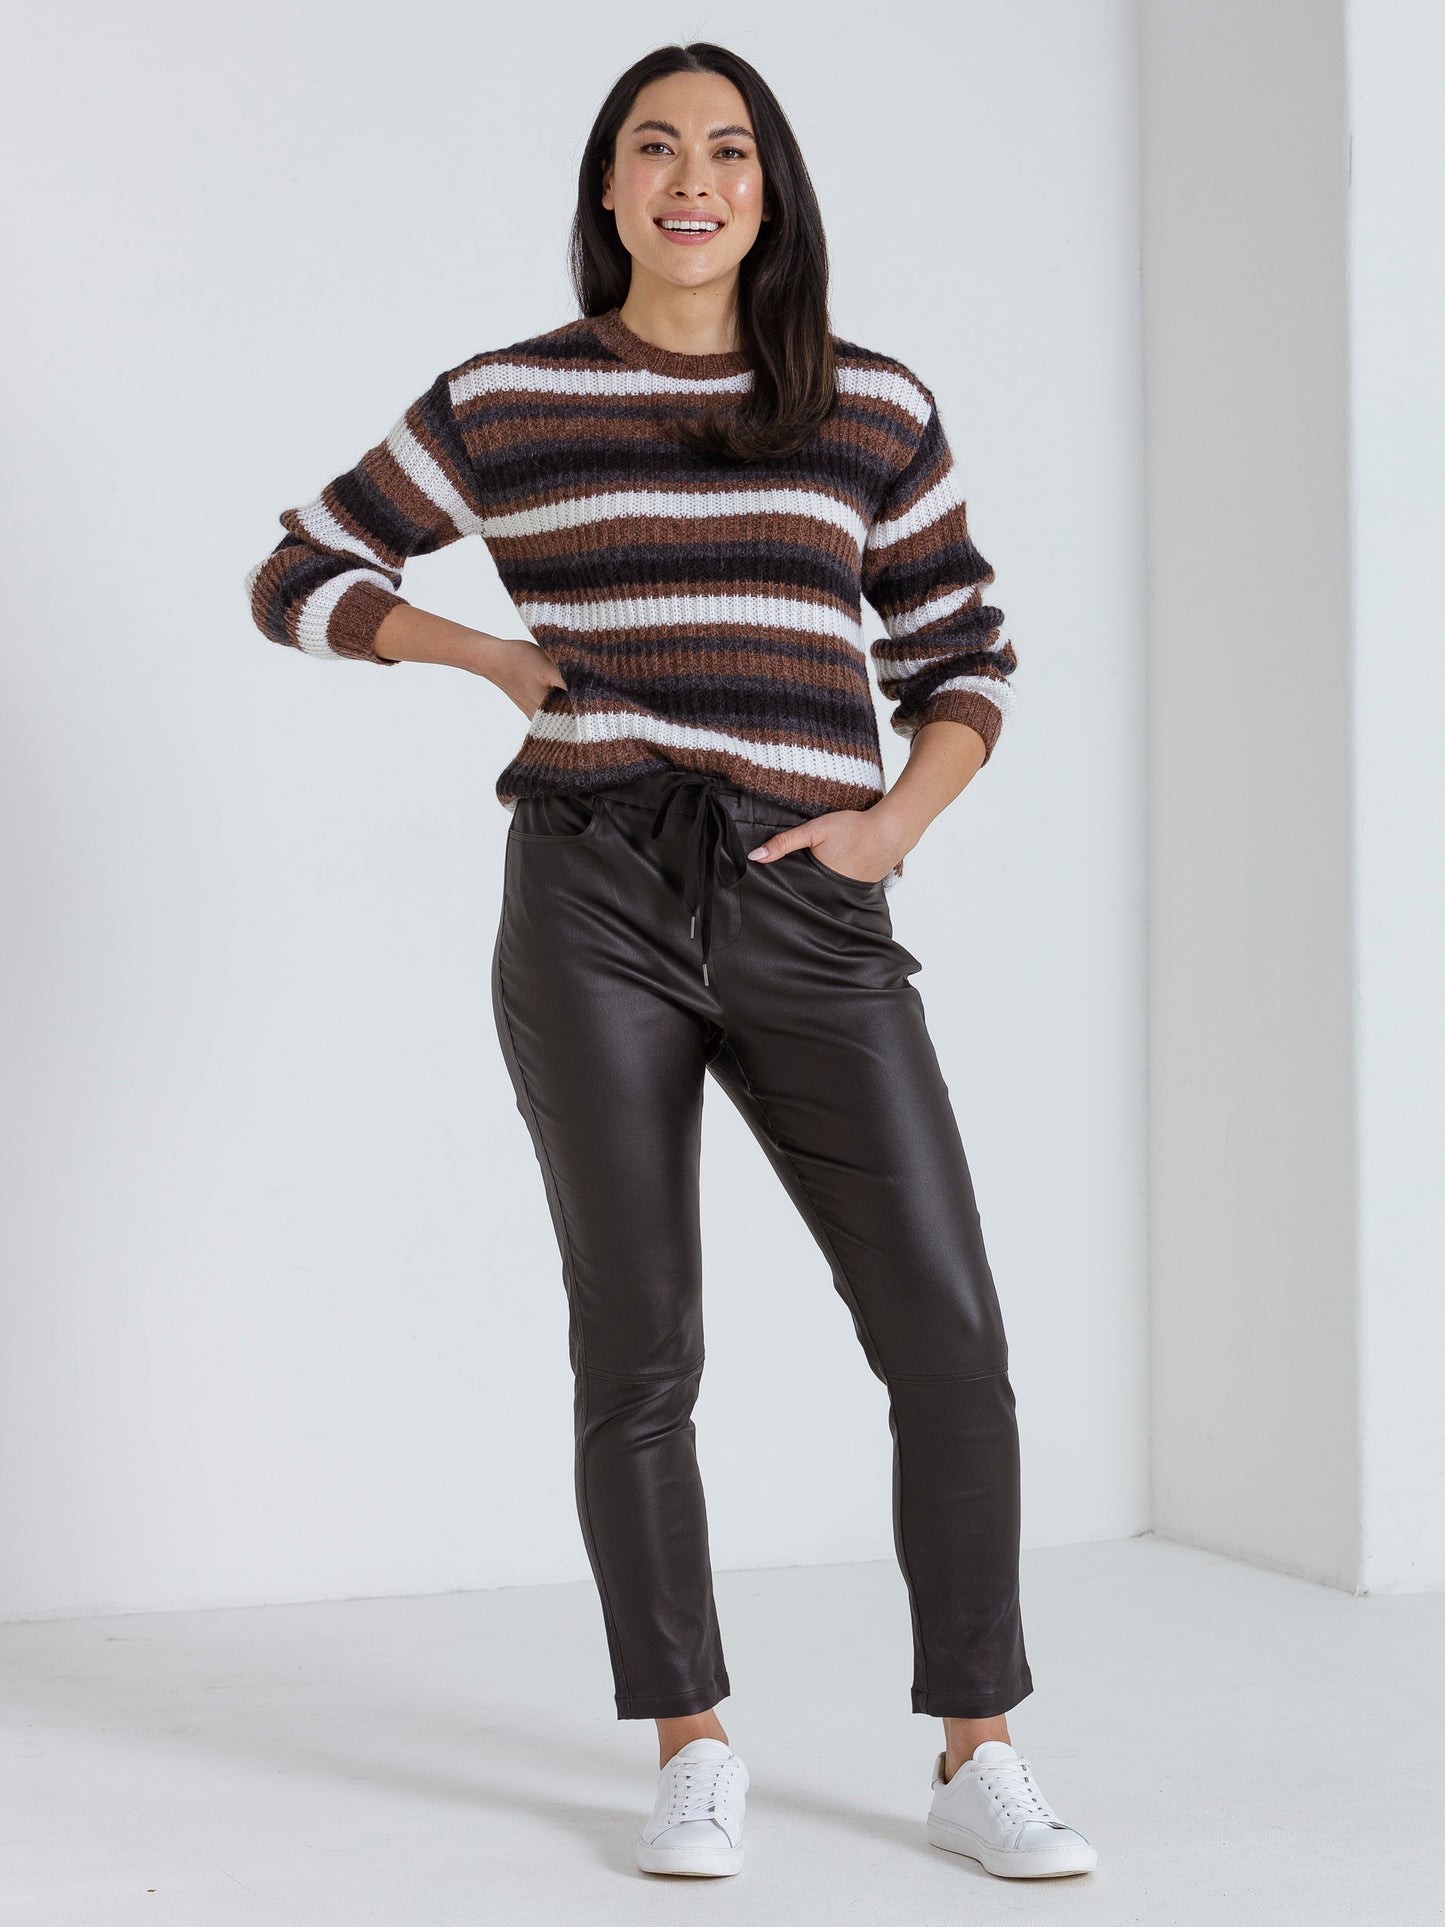 Marco Polo Long Sleeve Mix Stripe Sweater Toffee | MP33473